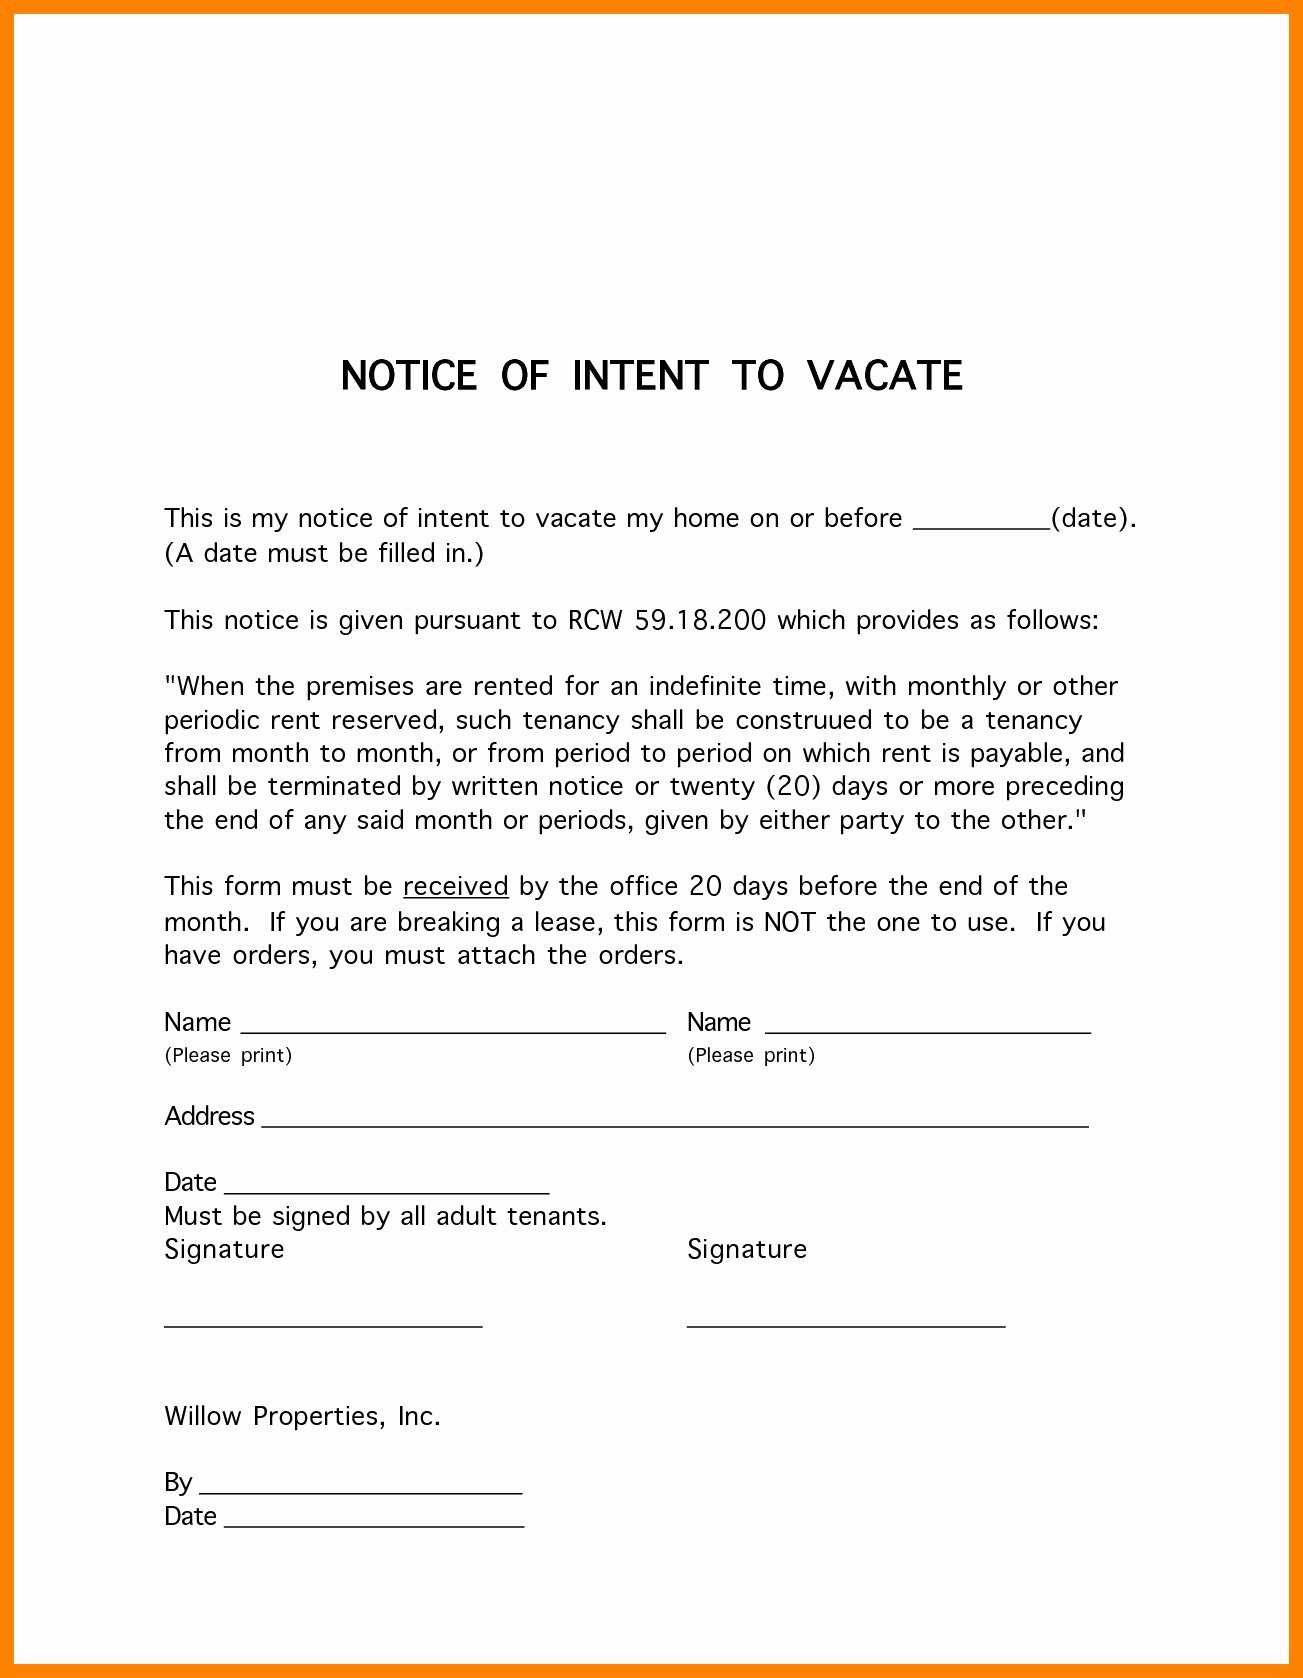 Intent to Vacate Letter Template Best Of Notice Intent to Vacate Letter Template Collection